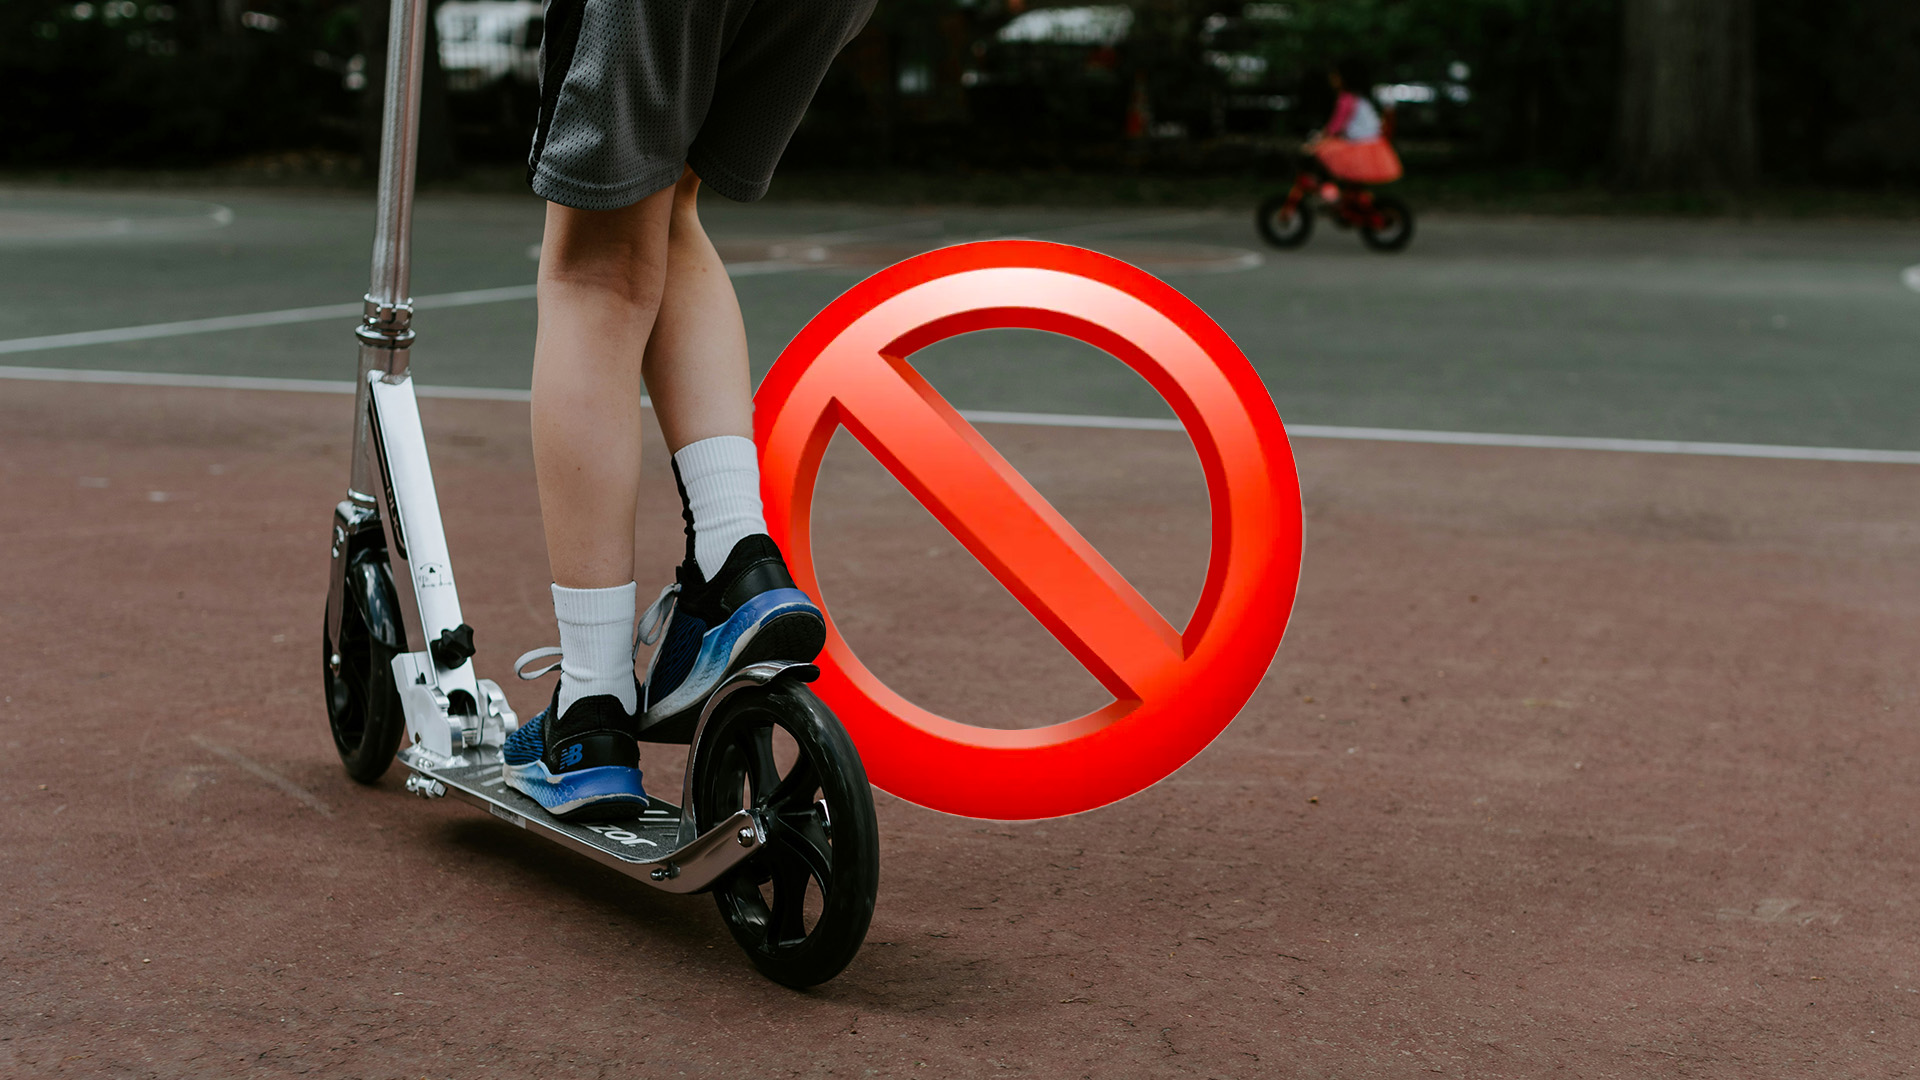 E-Scooter Rentals Banned From Today as €150 Grant Comes Into Effect